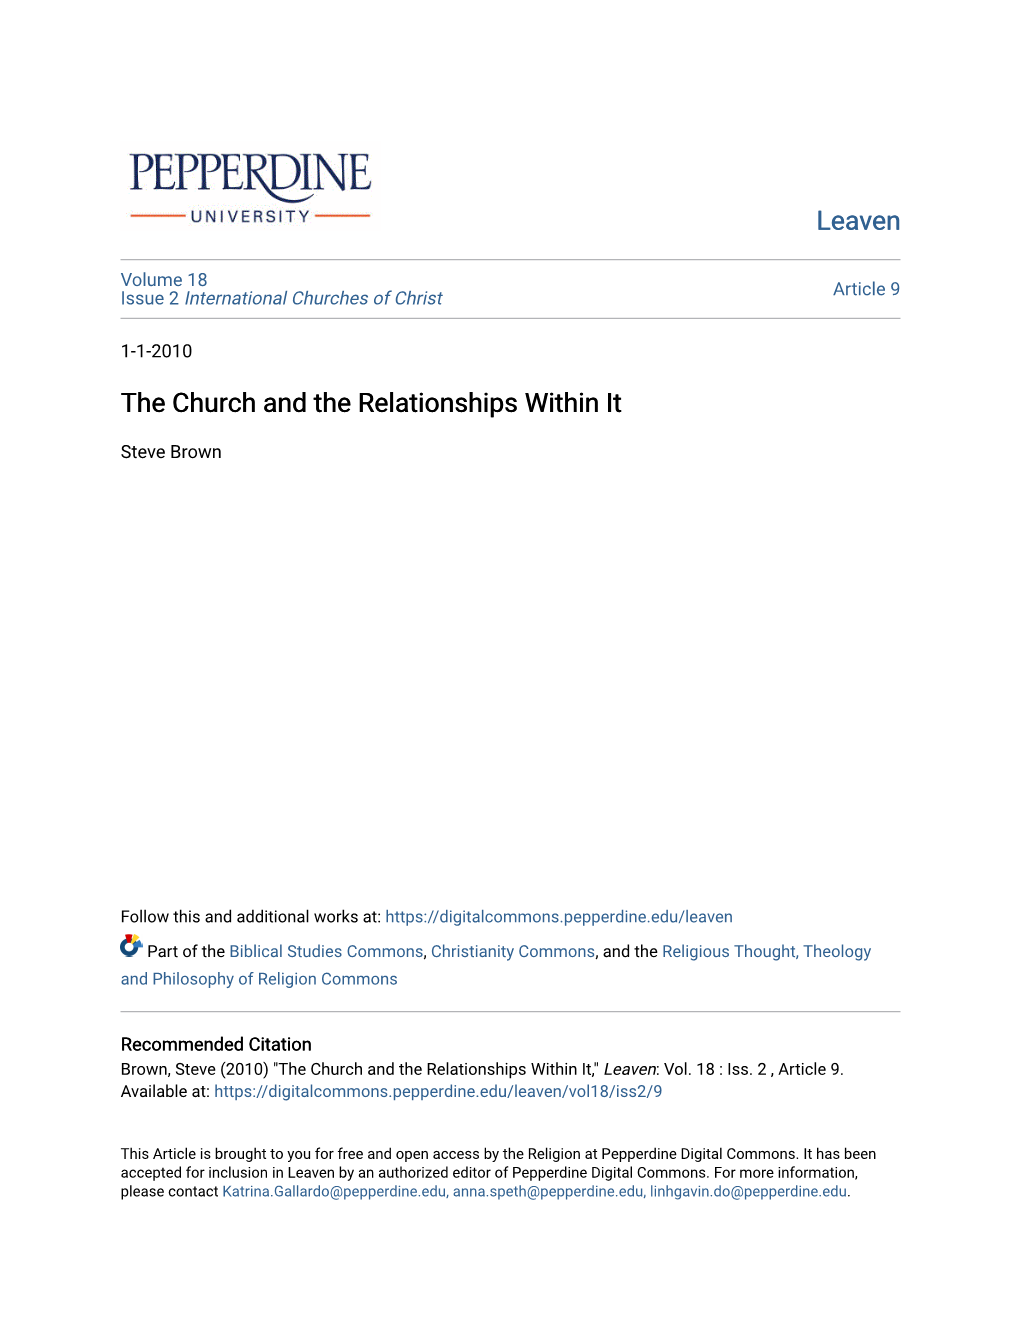 The Church and the Relationships Within It